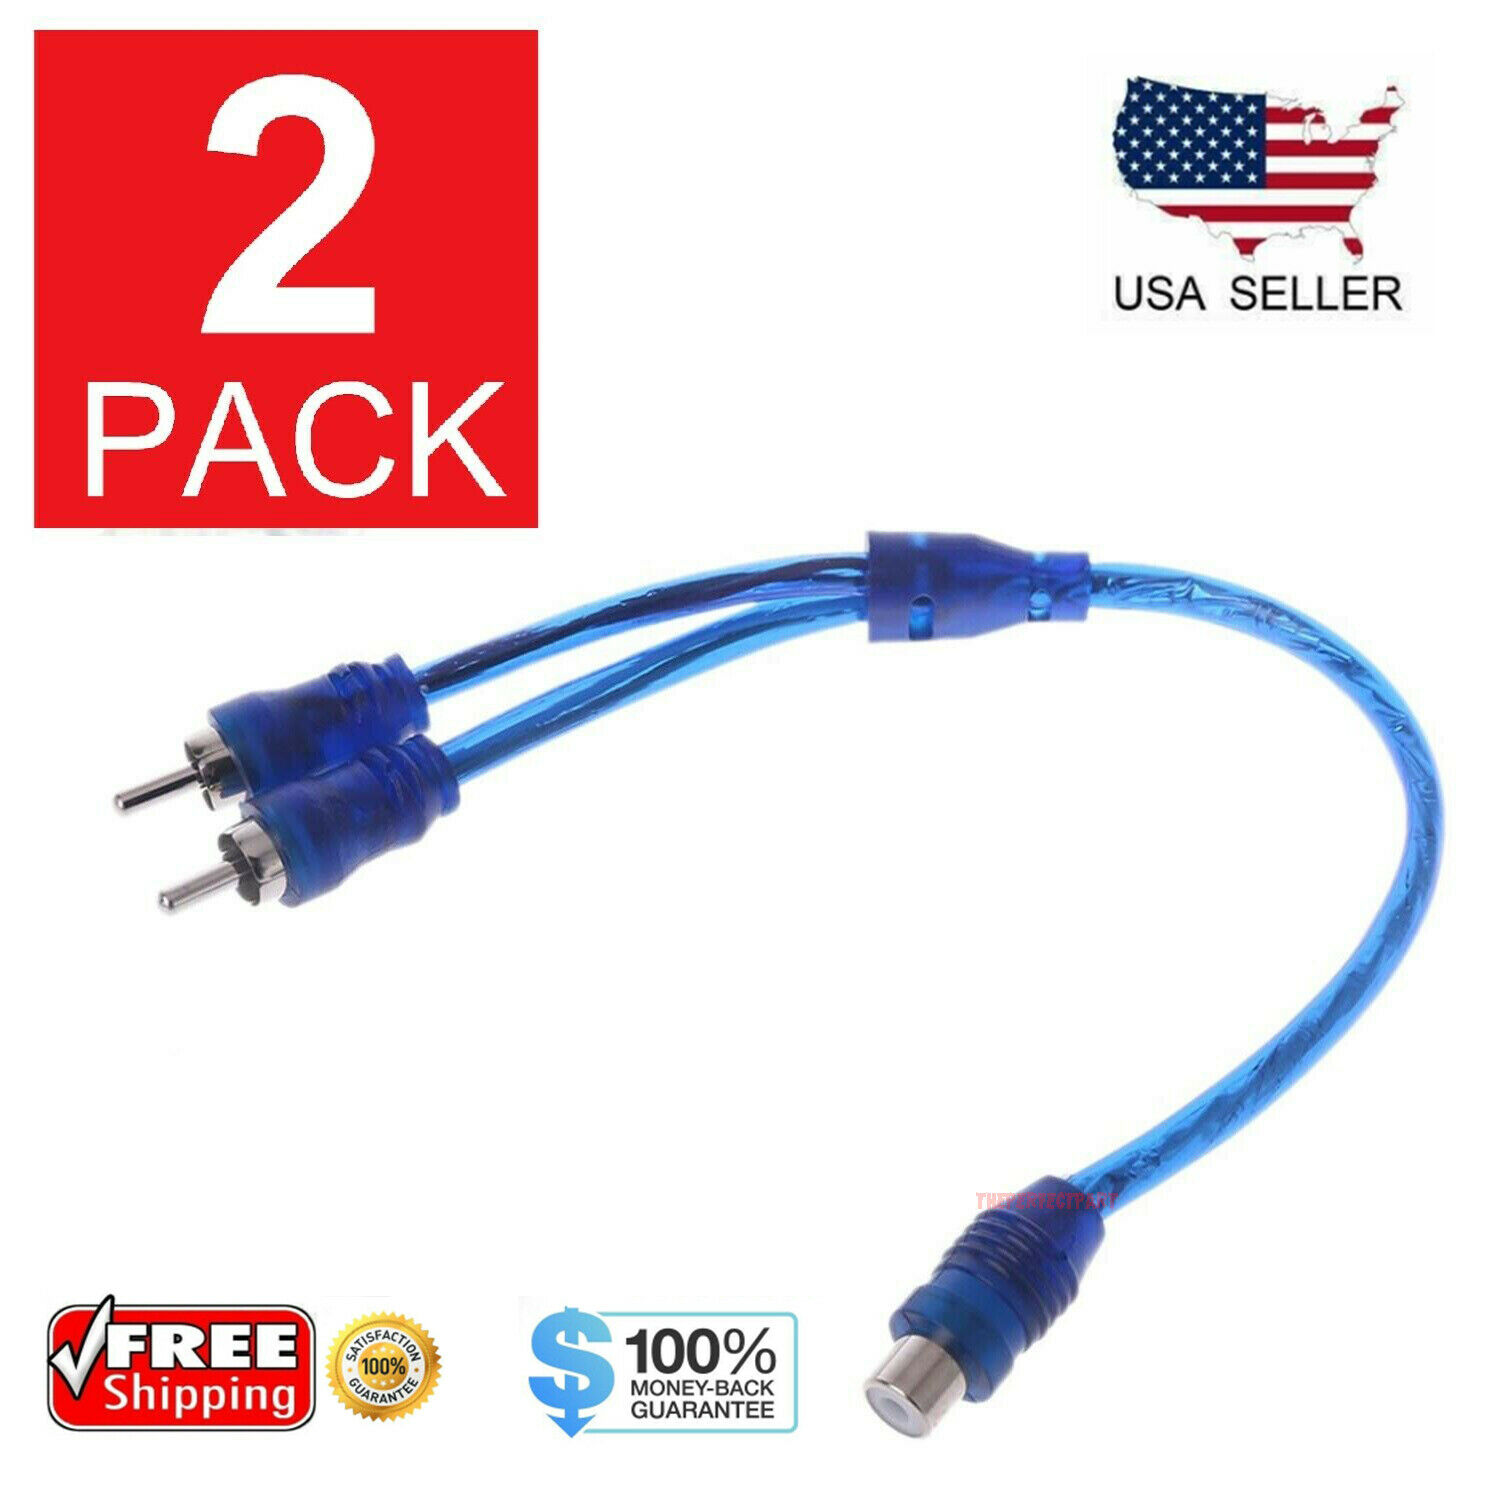 2x 7" Rca Audio Jack Cable Y Adapter Splitter 1 Female To 2 Male Plug Ofc 2 Pcs